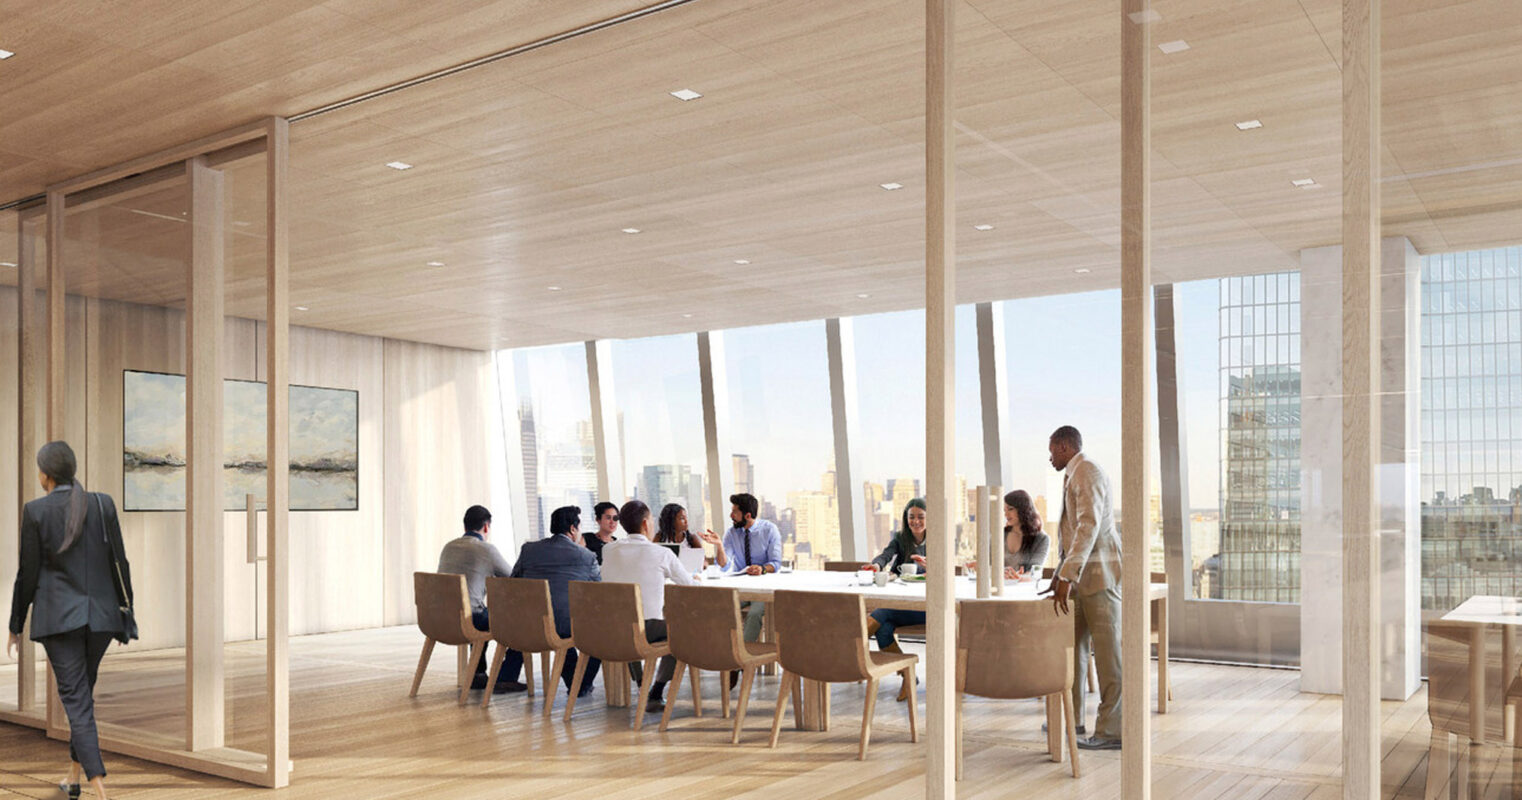 Bright, airy boardroom featuring panoramic city views through floor-to-ceiling windows, warm wooden floors and furniture, and sleek, minimalistic design encouraging focus and collaboration.